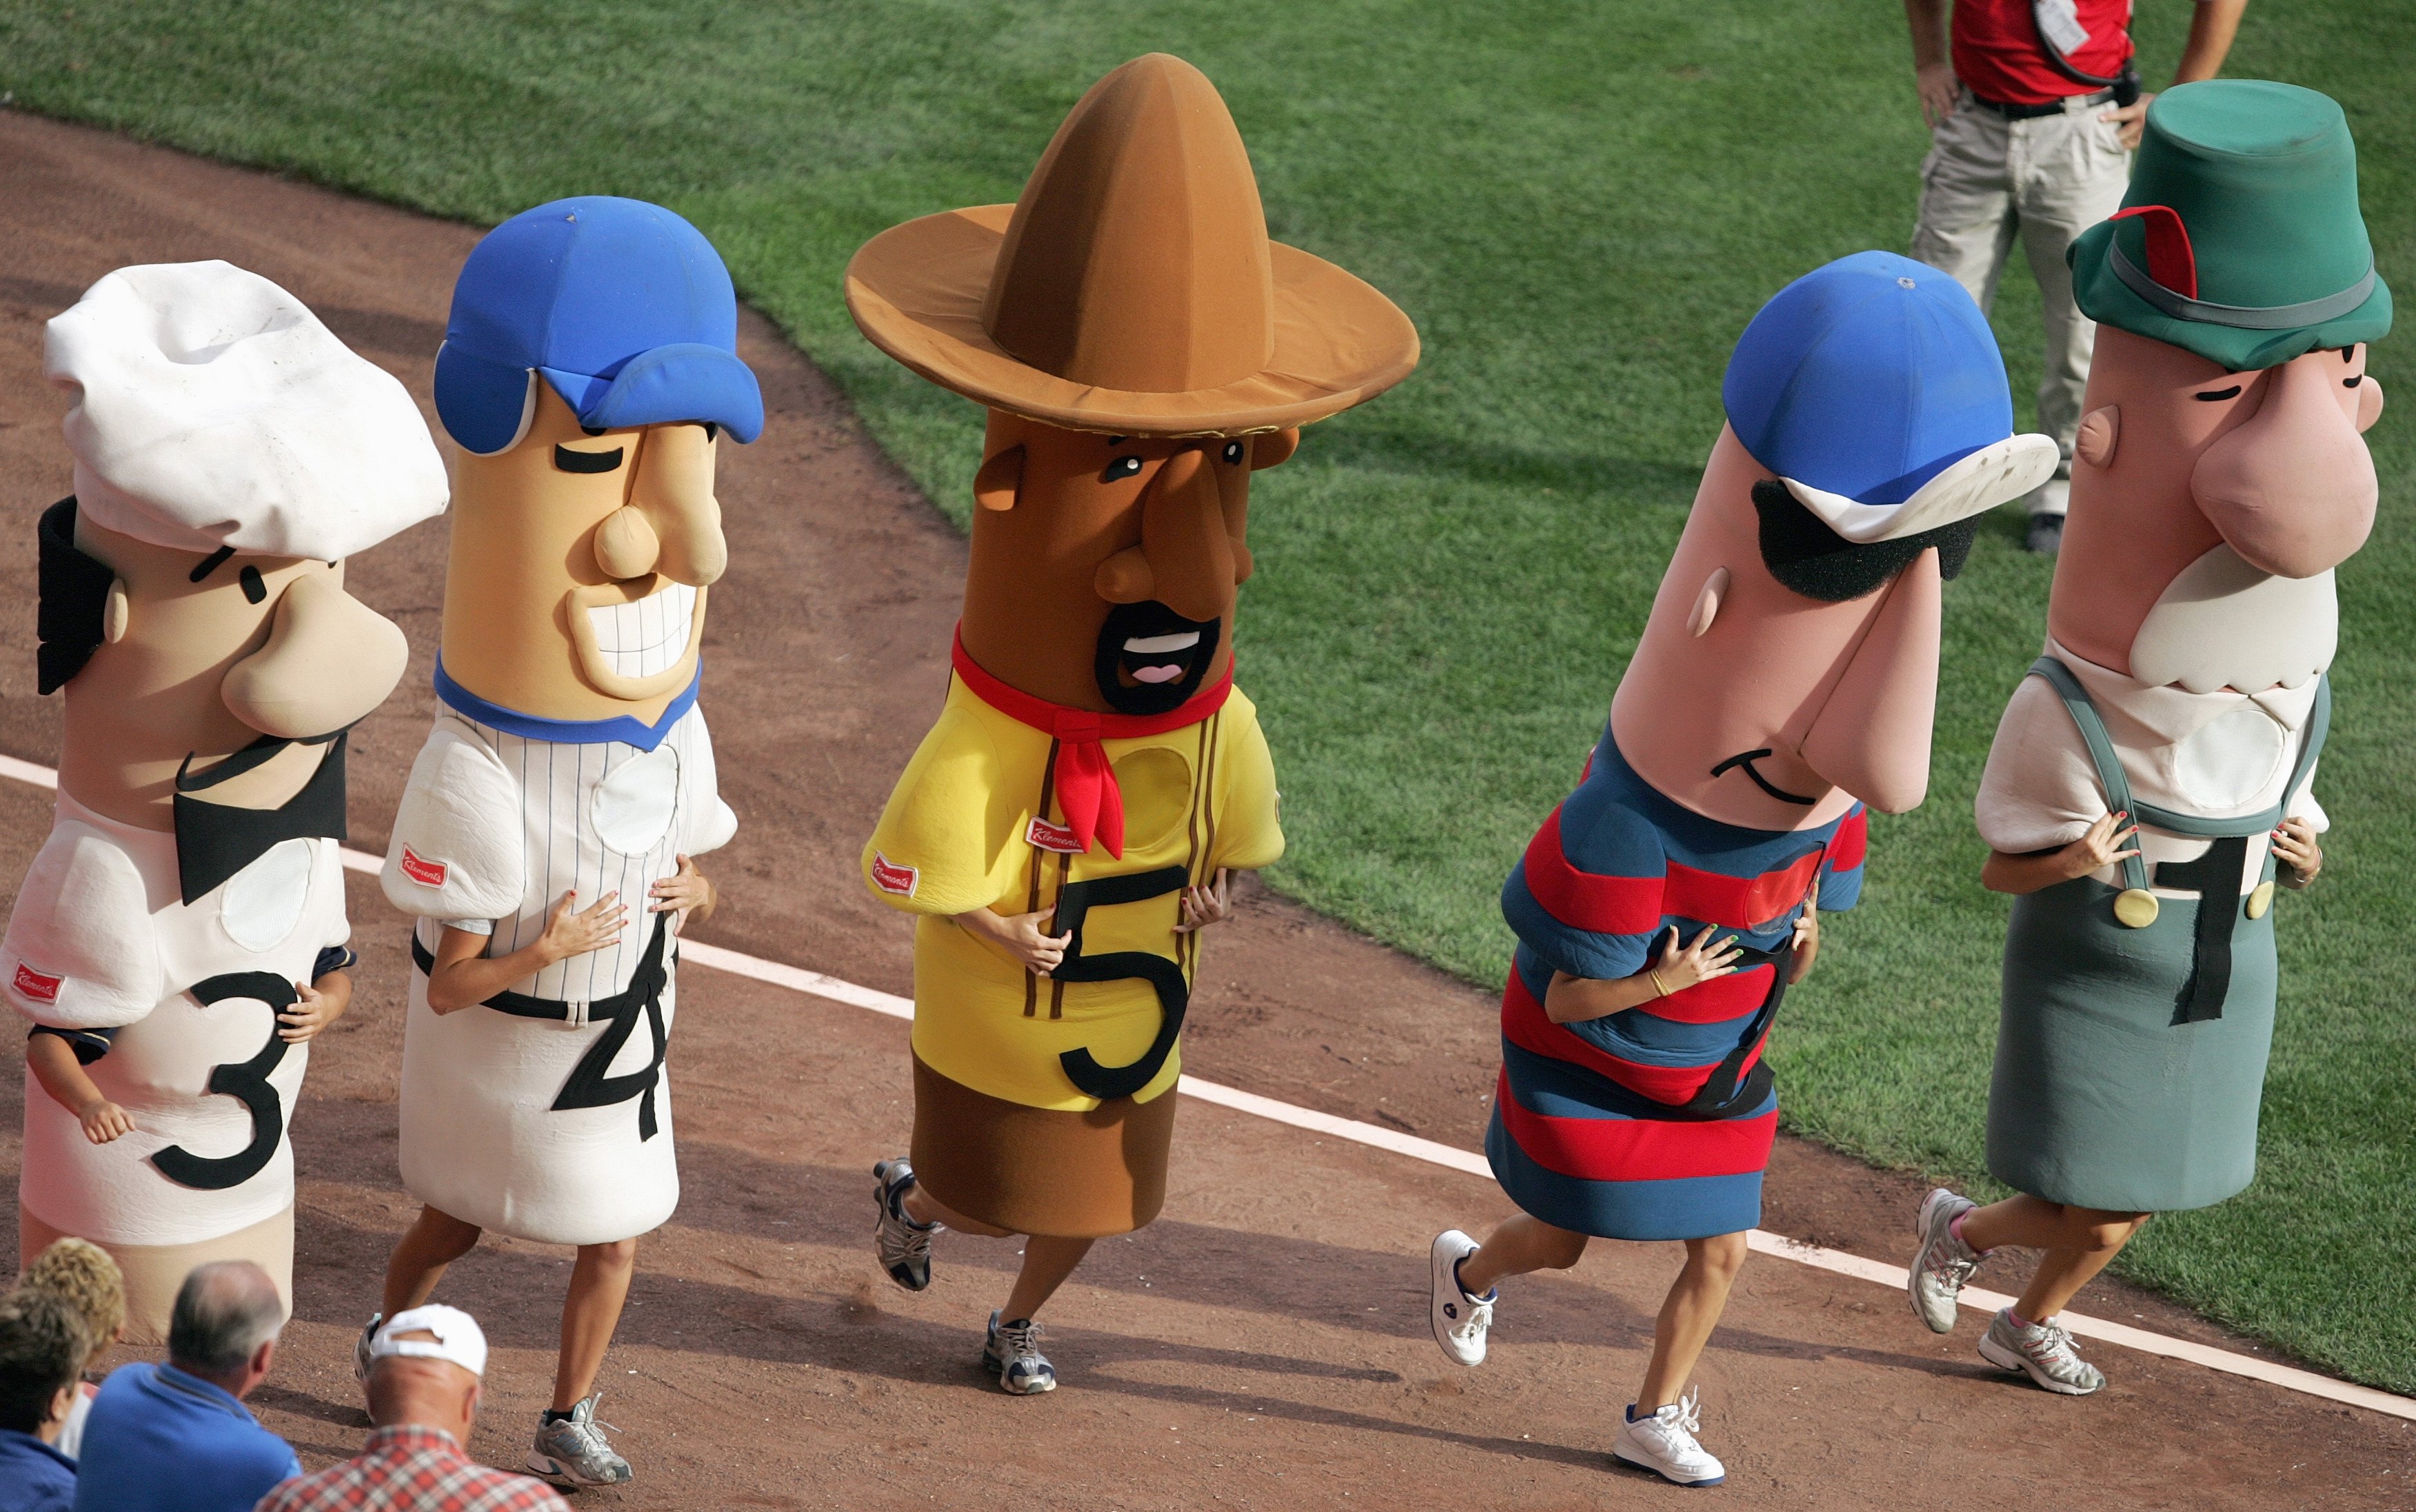 MILWAUKEE - SEPTEMBER 29: Italian Sausage,Hot Dog,Chorizo,Polish Sausage and Bratwurst get ready for the Sausage Race during the game between the San Diego Padres and the Milwaukee Brewers on September 29, 2007 at Miller Park in Milwaukee, Wisconsin. The